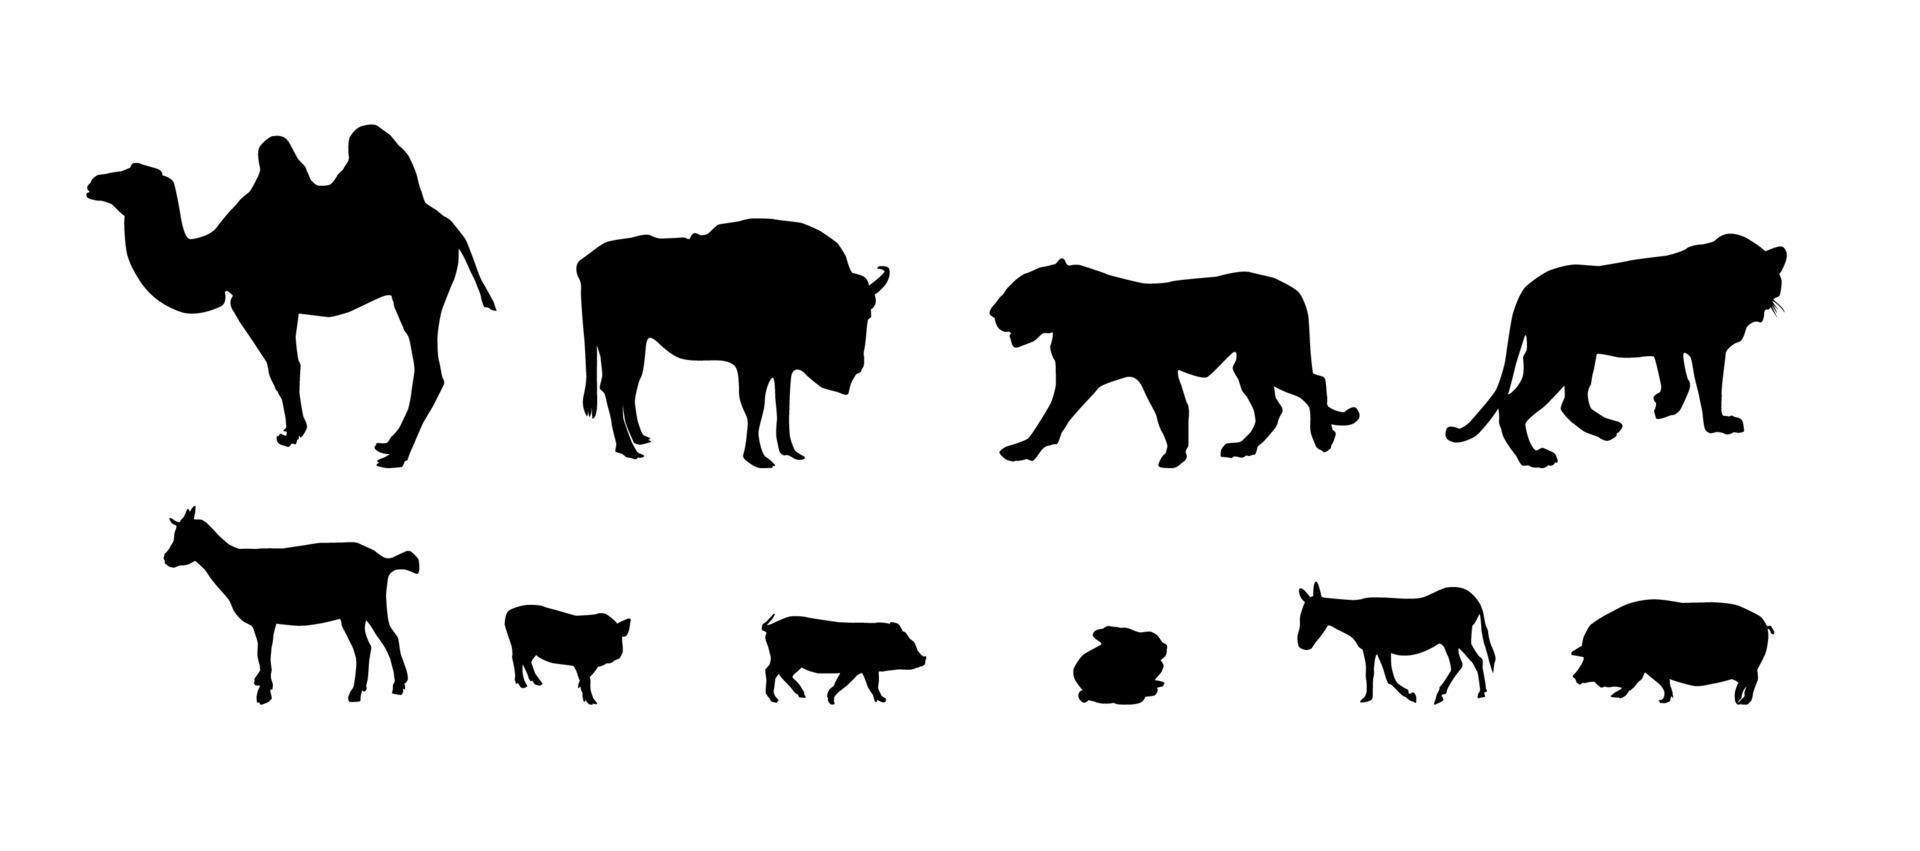 Silhouette of Wild and Domestic Animals. Black and White vector